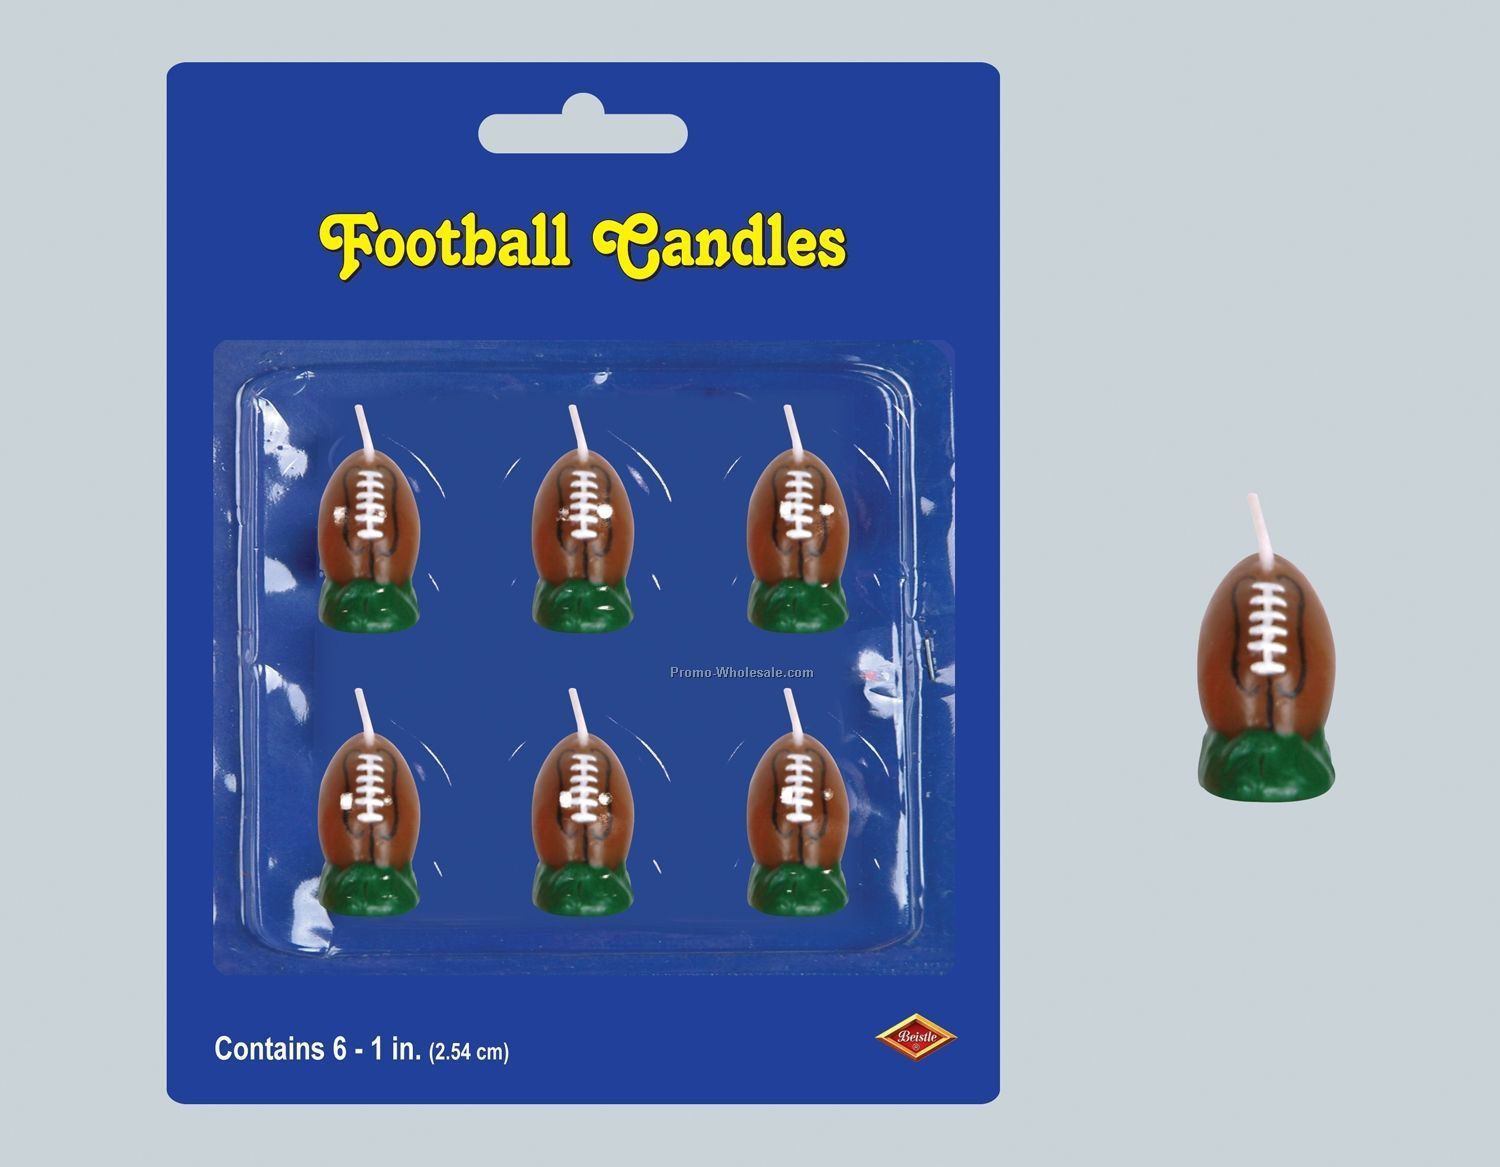 Life's Moments Birthday Candles - Football